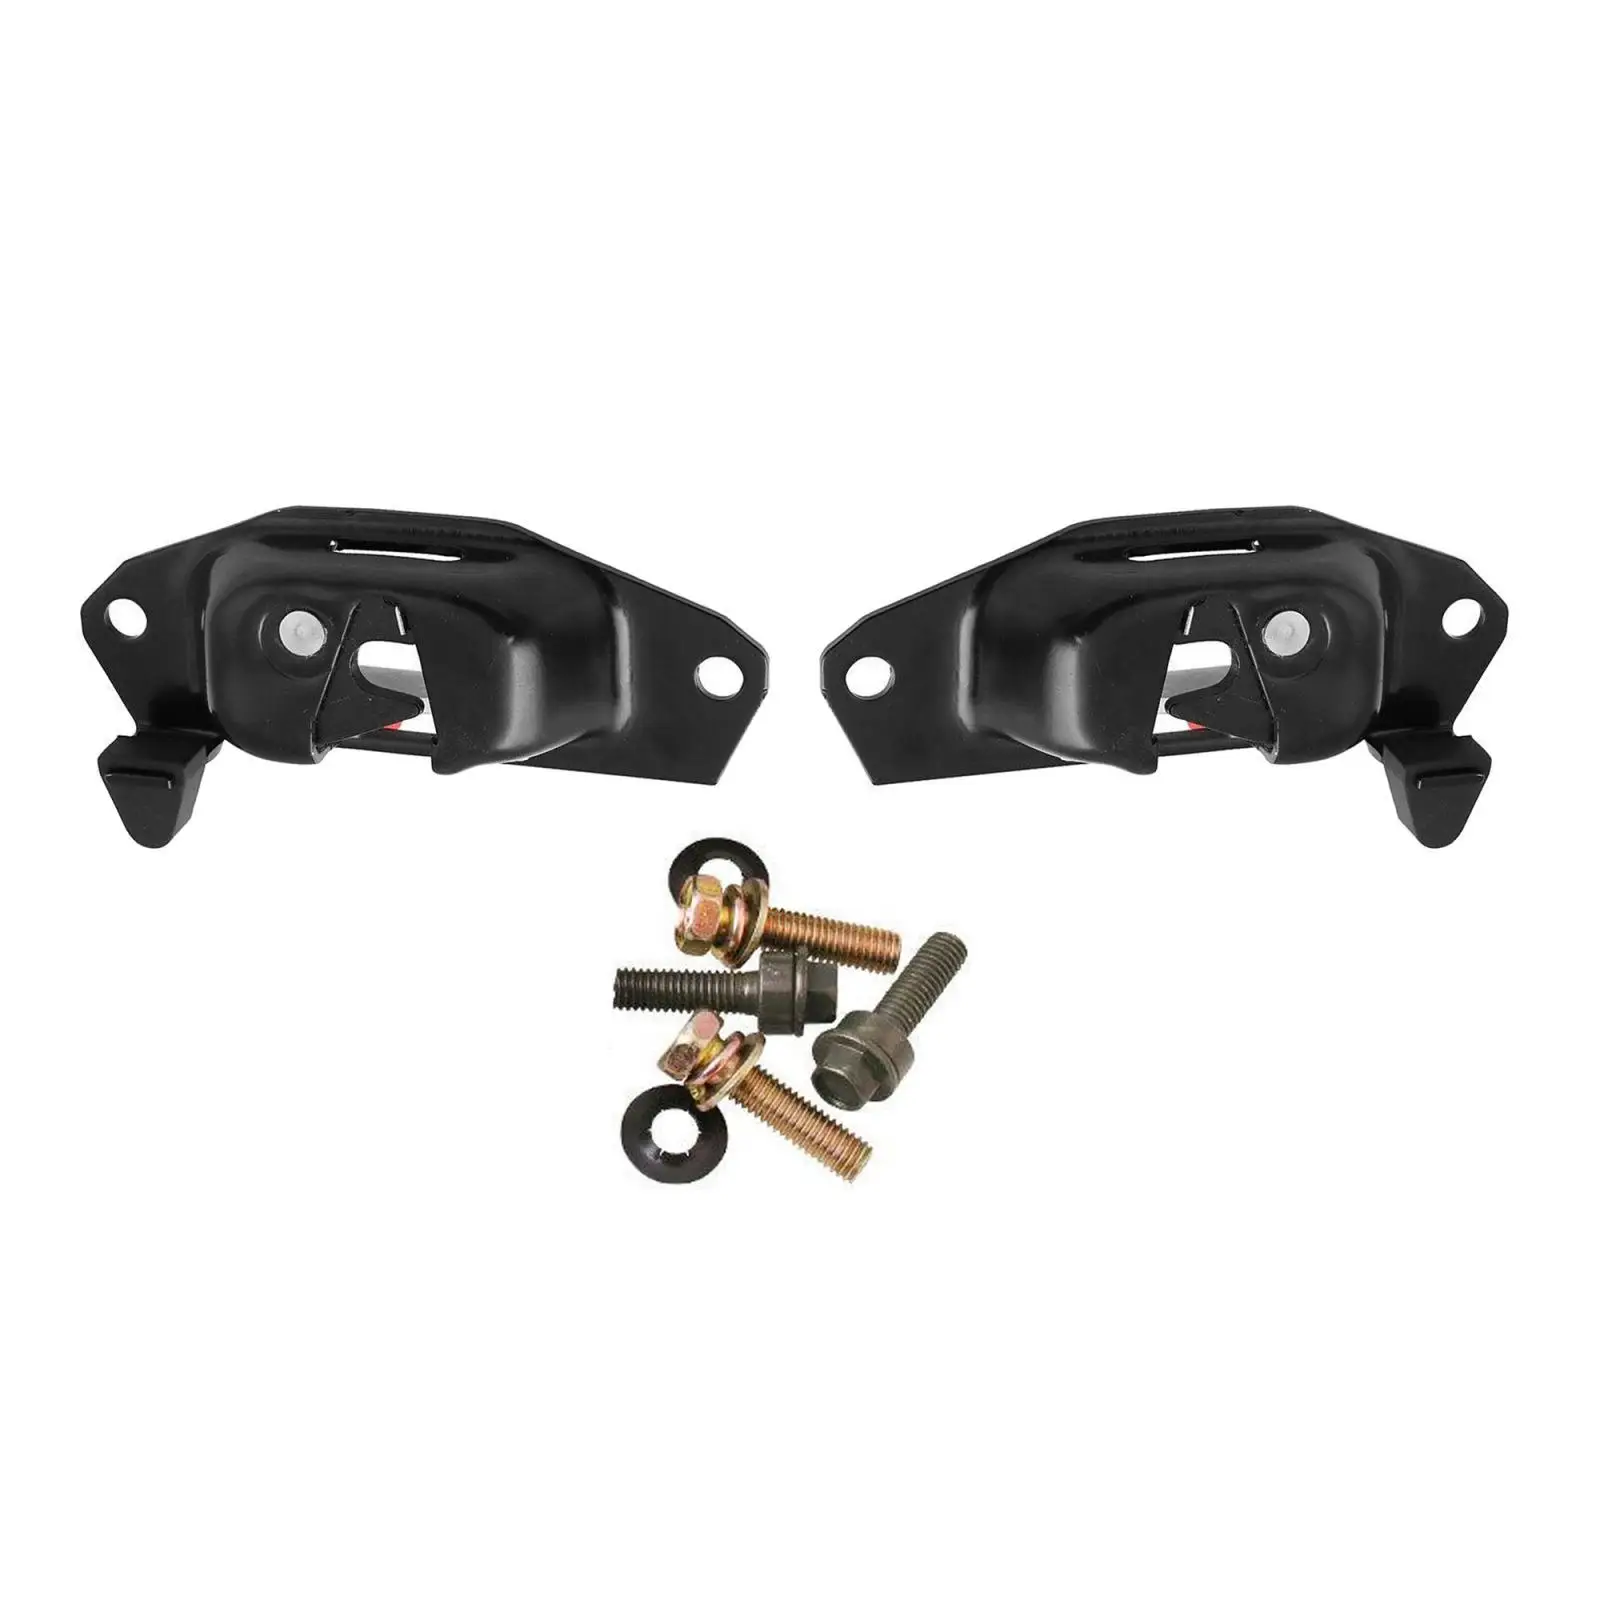  Pair Tailgate Latch Lever with  Bolt, Fit for 1999-2007  Silverad Replace # 15921948 15921949, Rear Gate Lock Latch